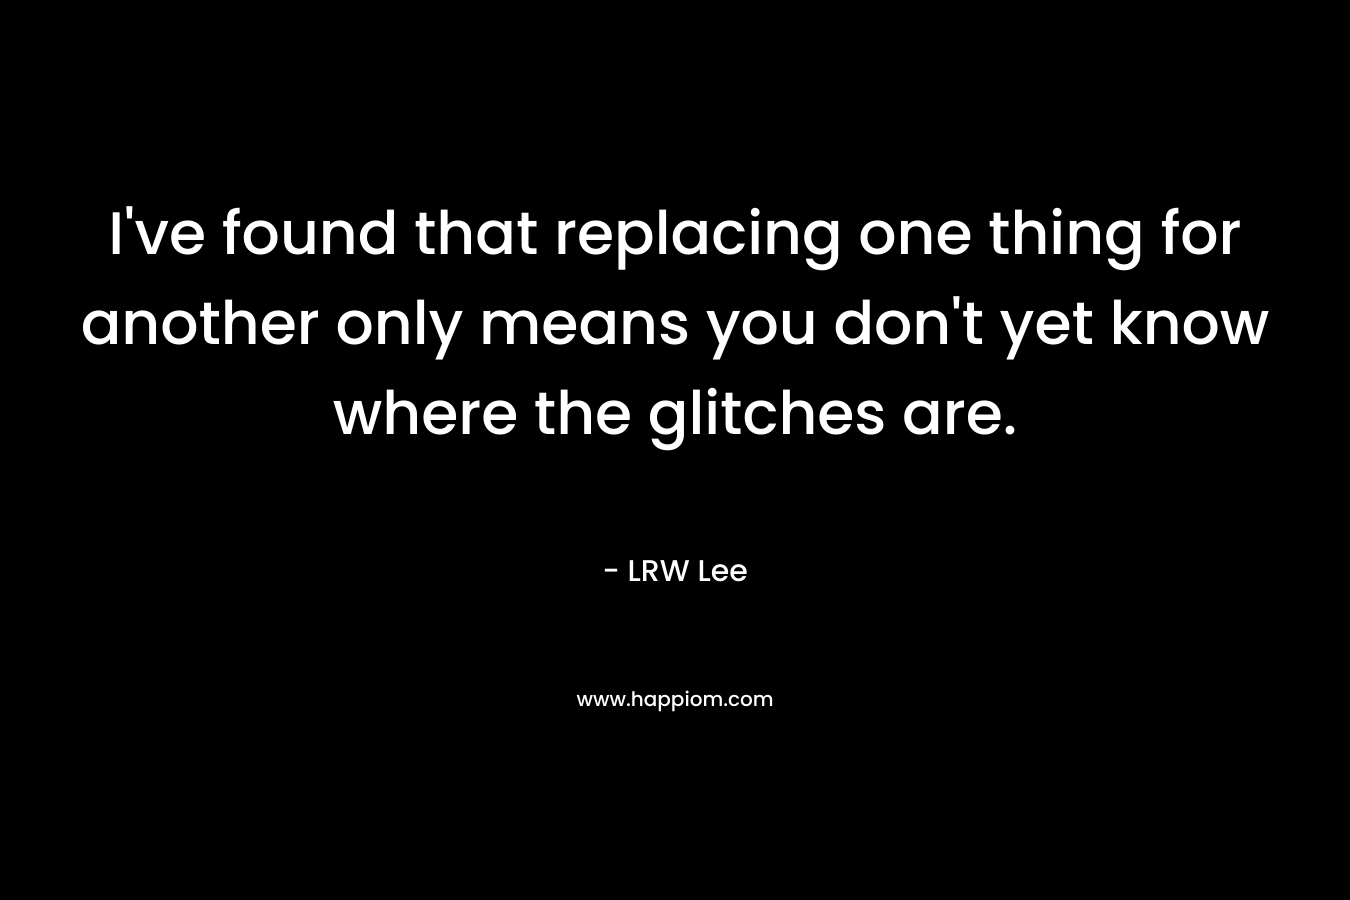 I’ve found that replacing one thing for another only means you don’t yet know where the glitches are. – LRW Lee